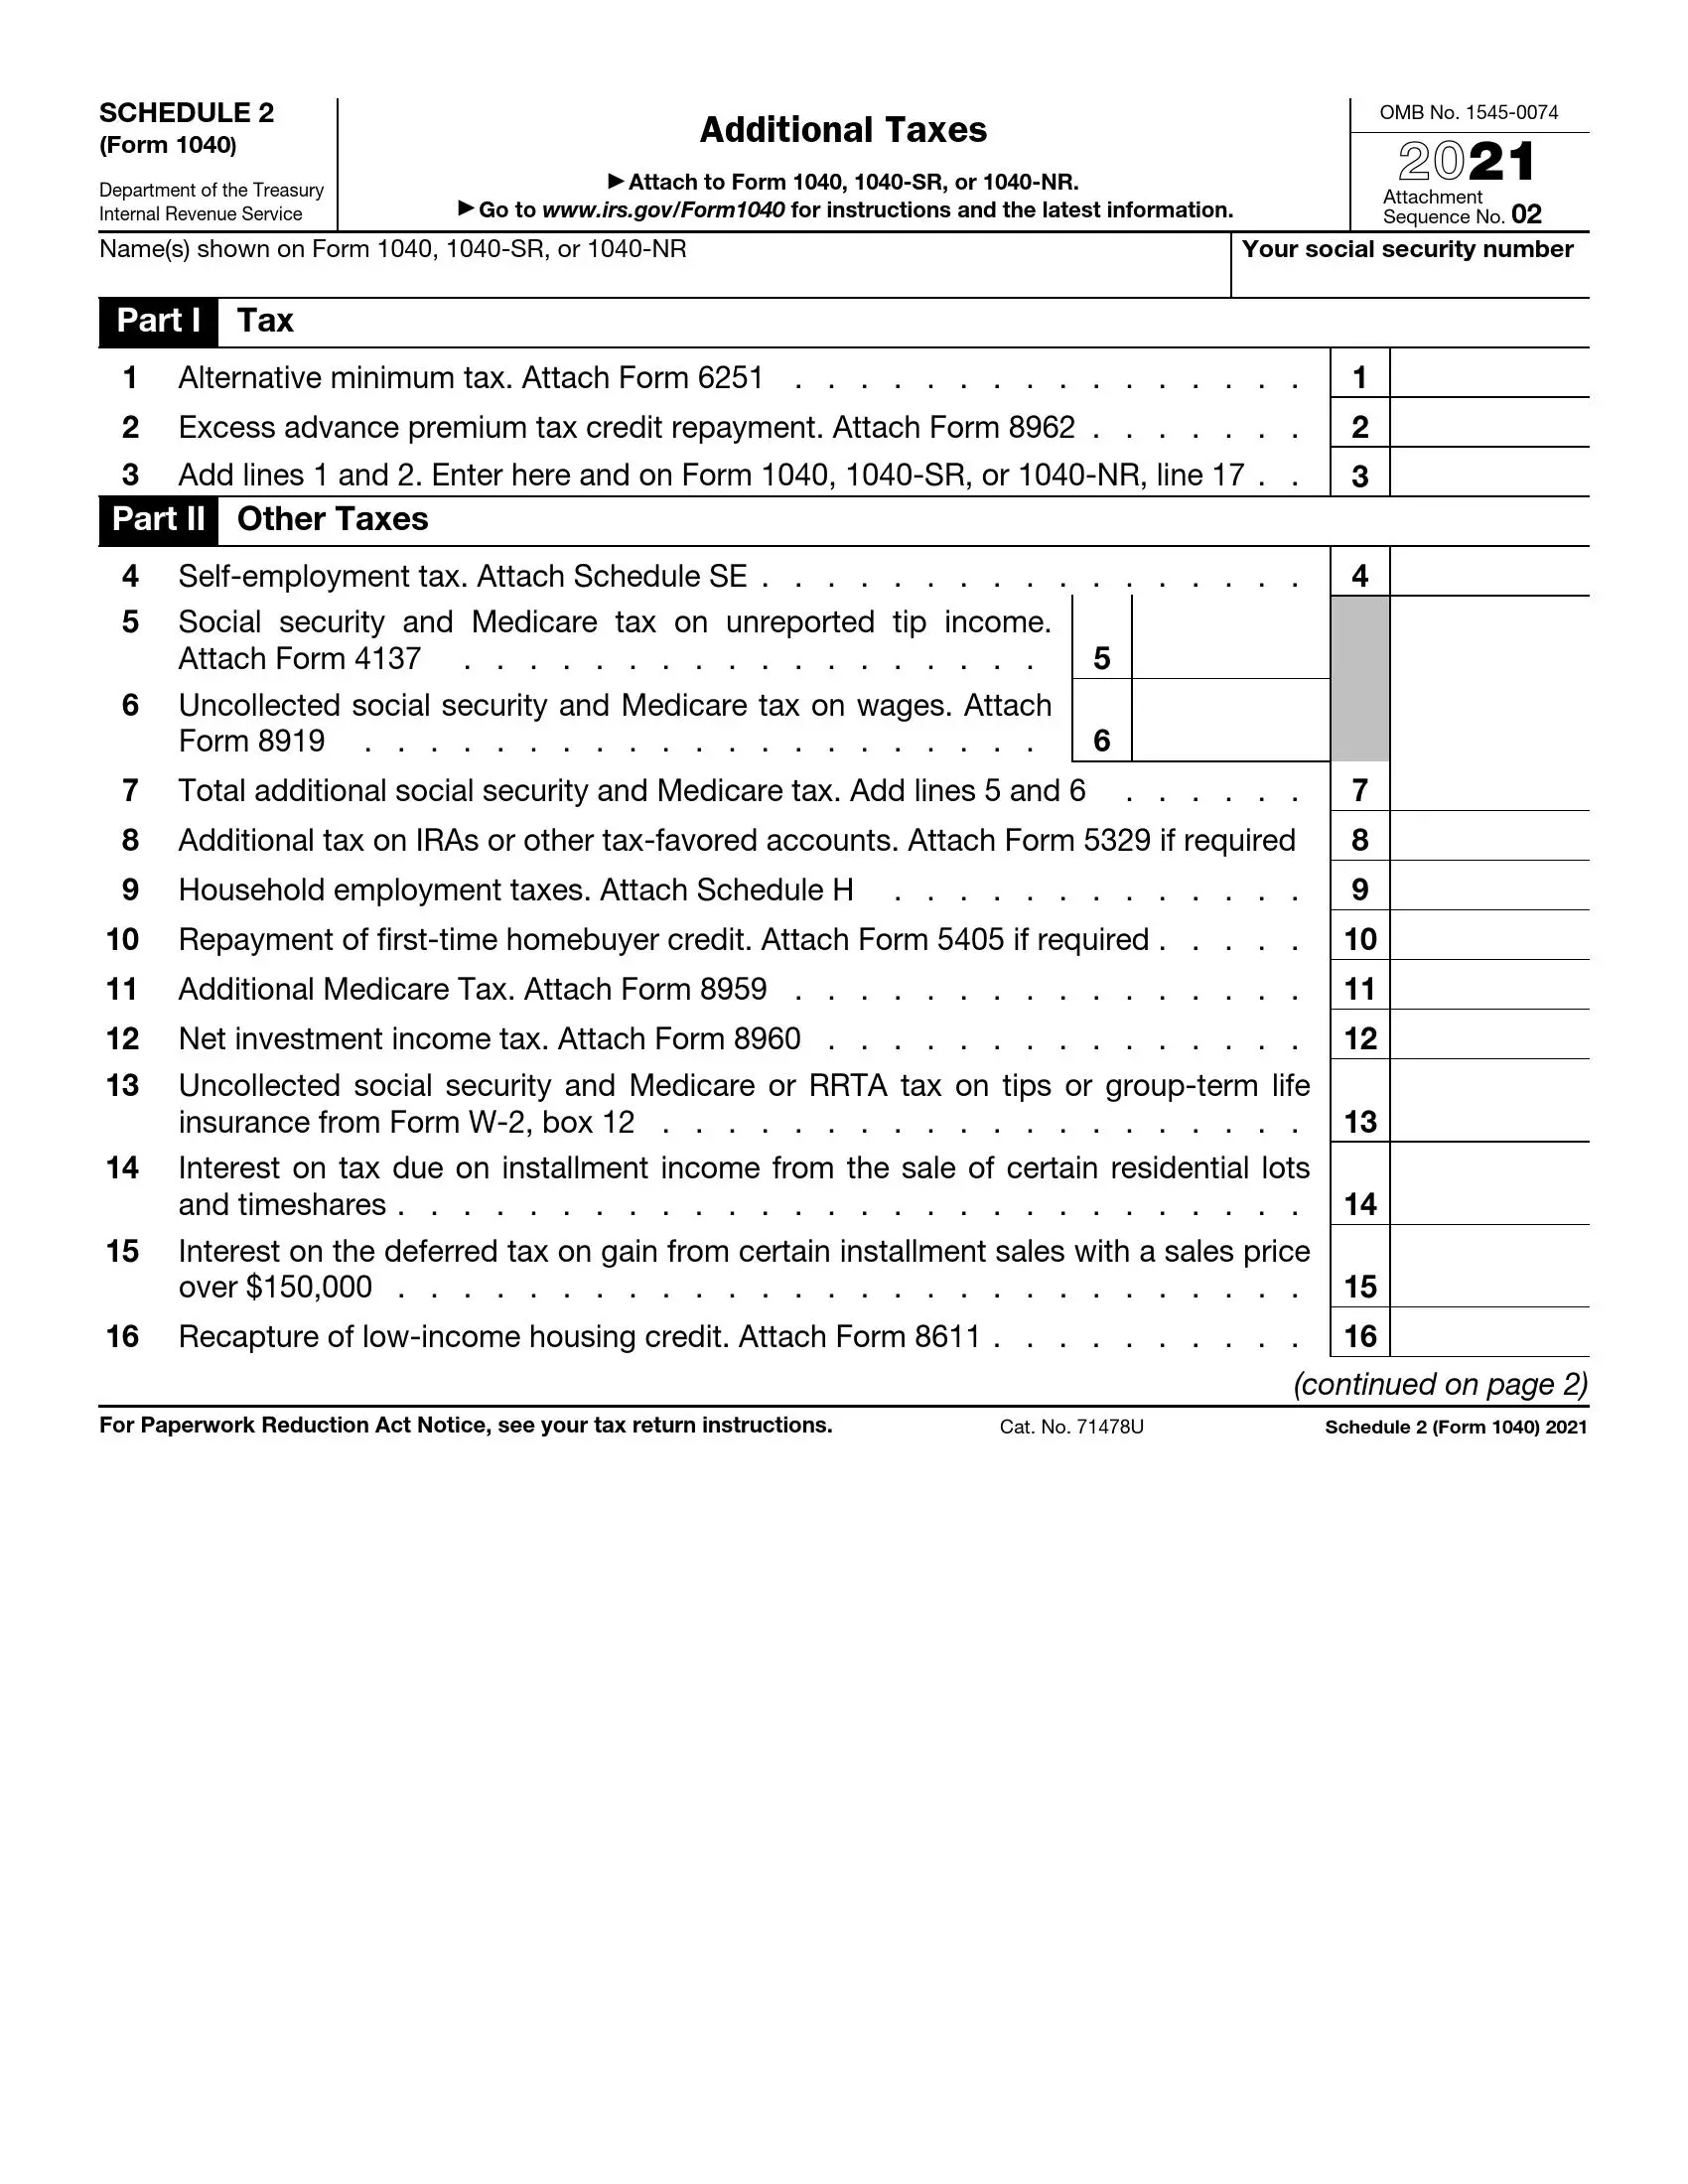 irs schedule 2 form 1040 or 1040-sr 2021 preview